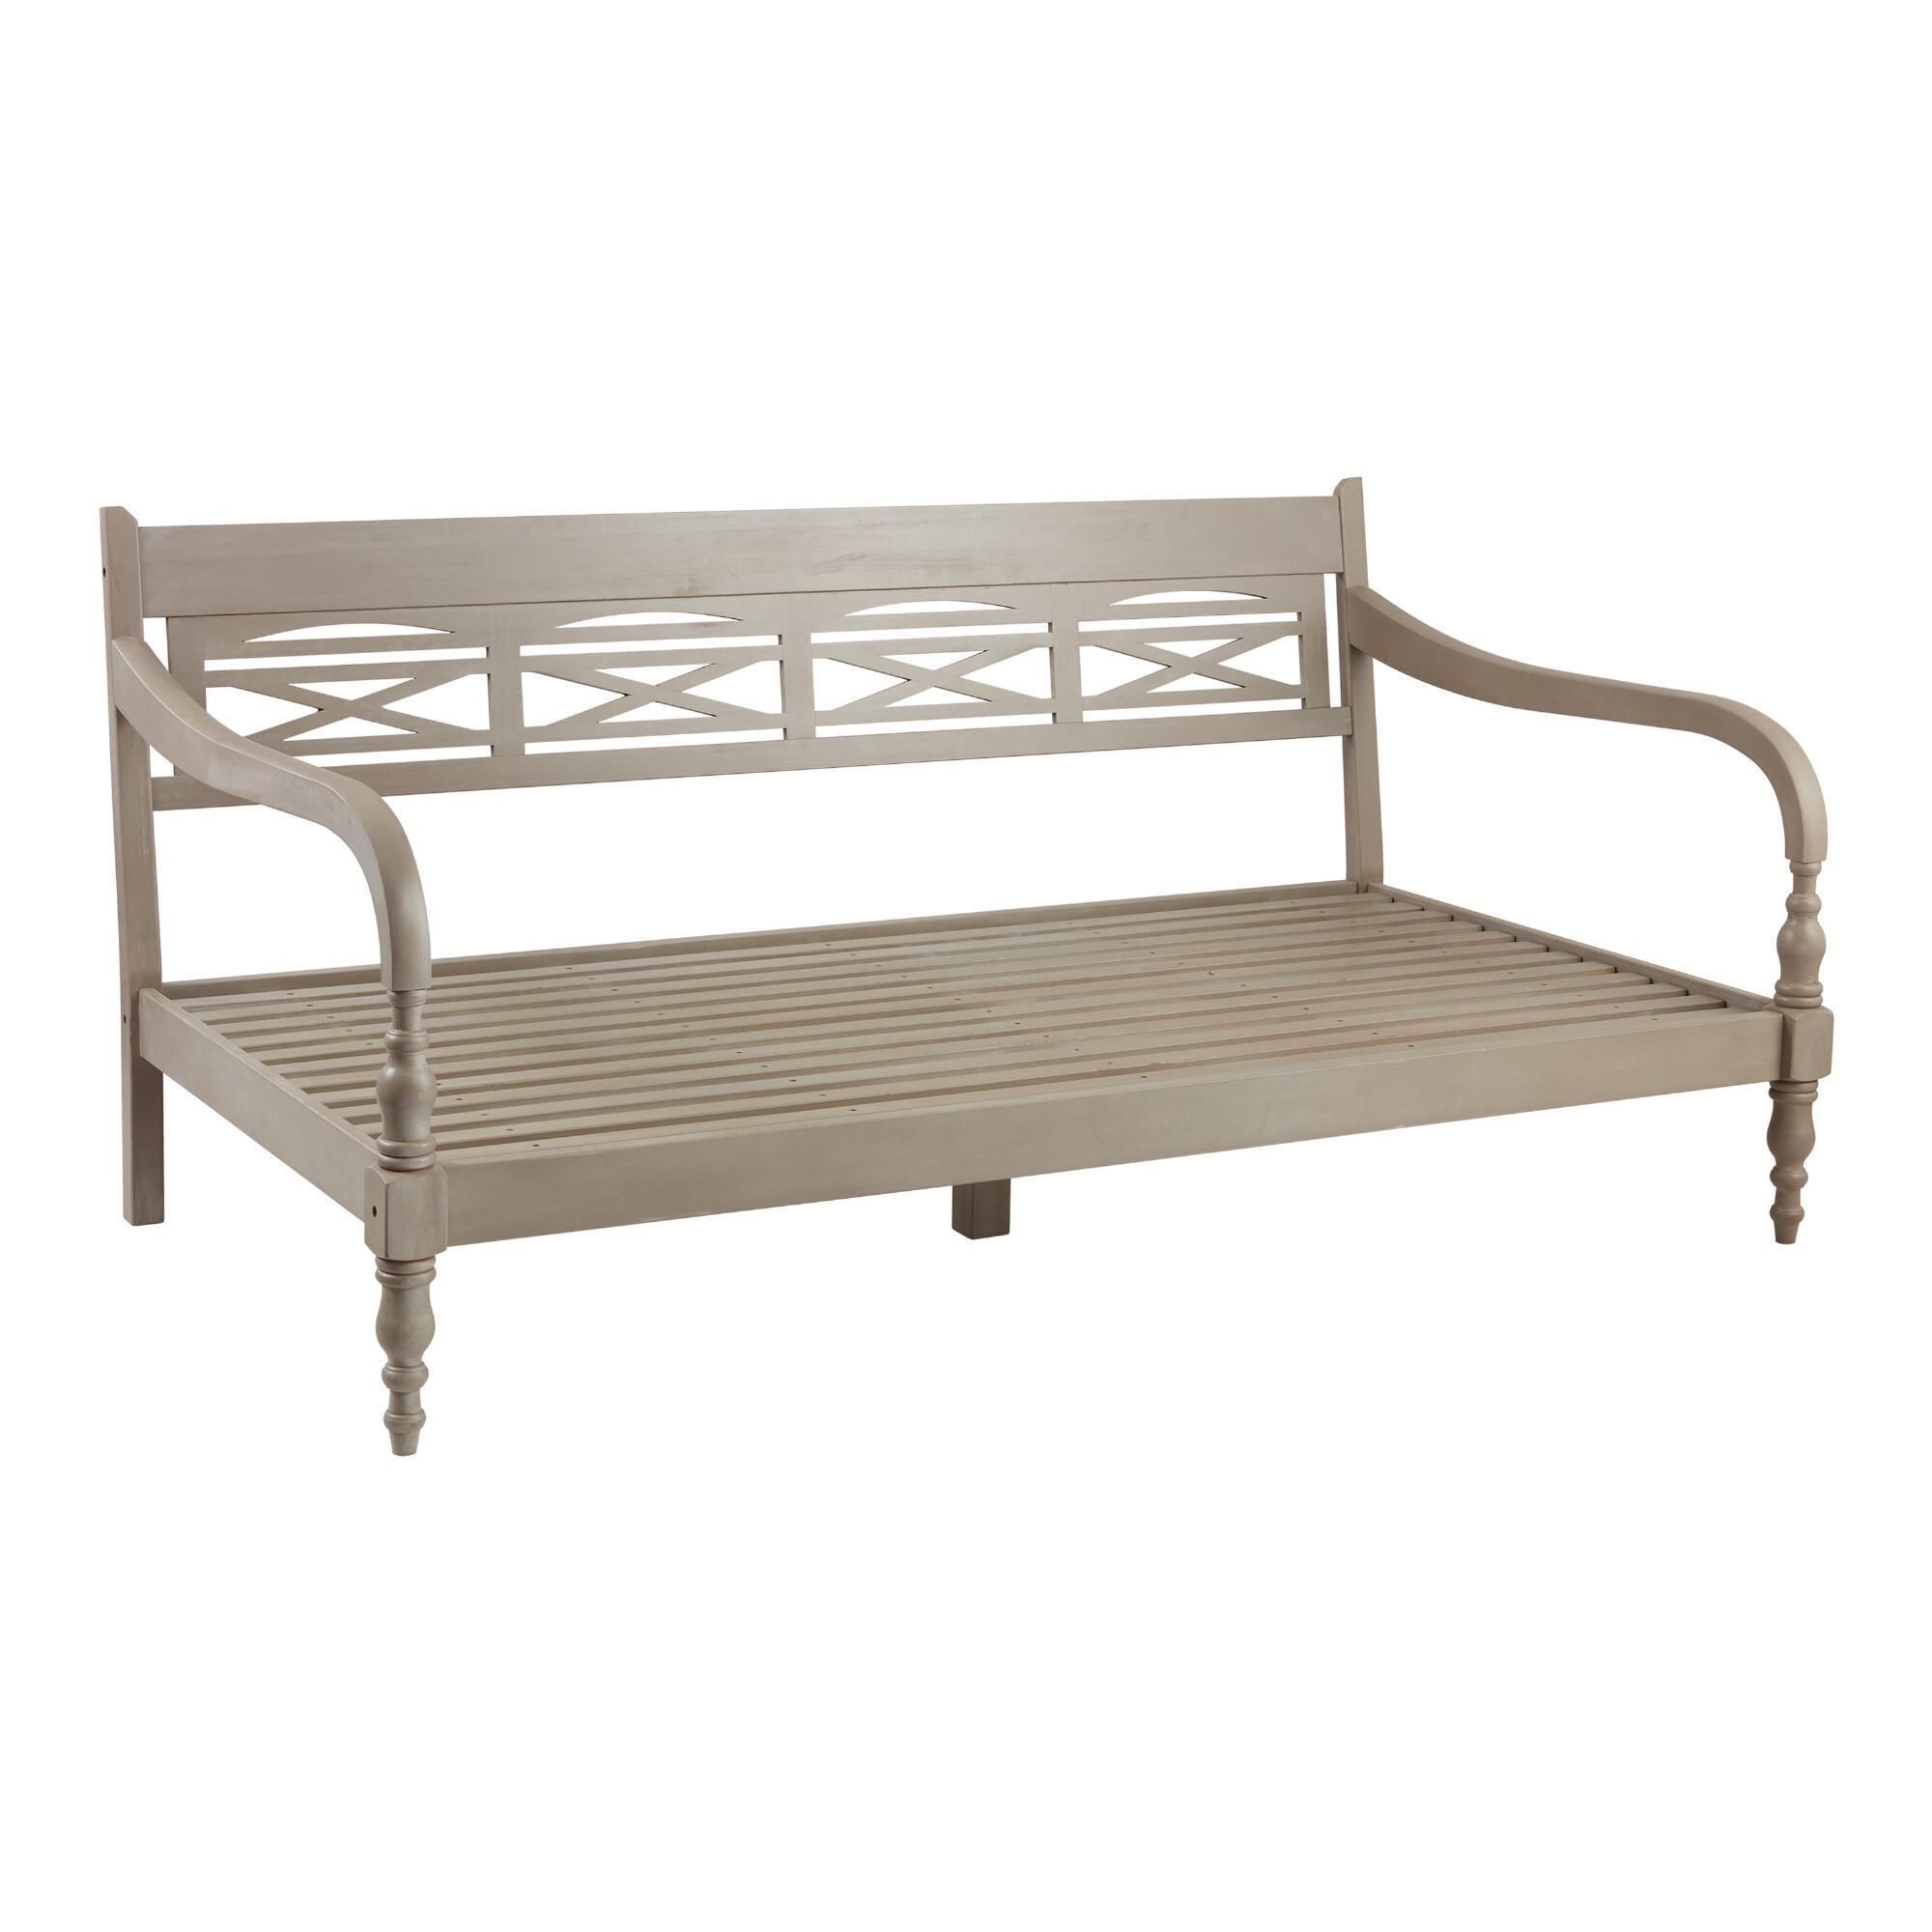 Indonesian Daybed Frame: Gray - Wood by World Market | World Market